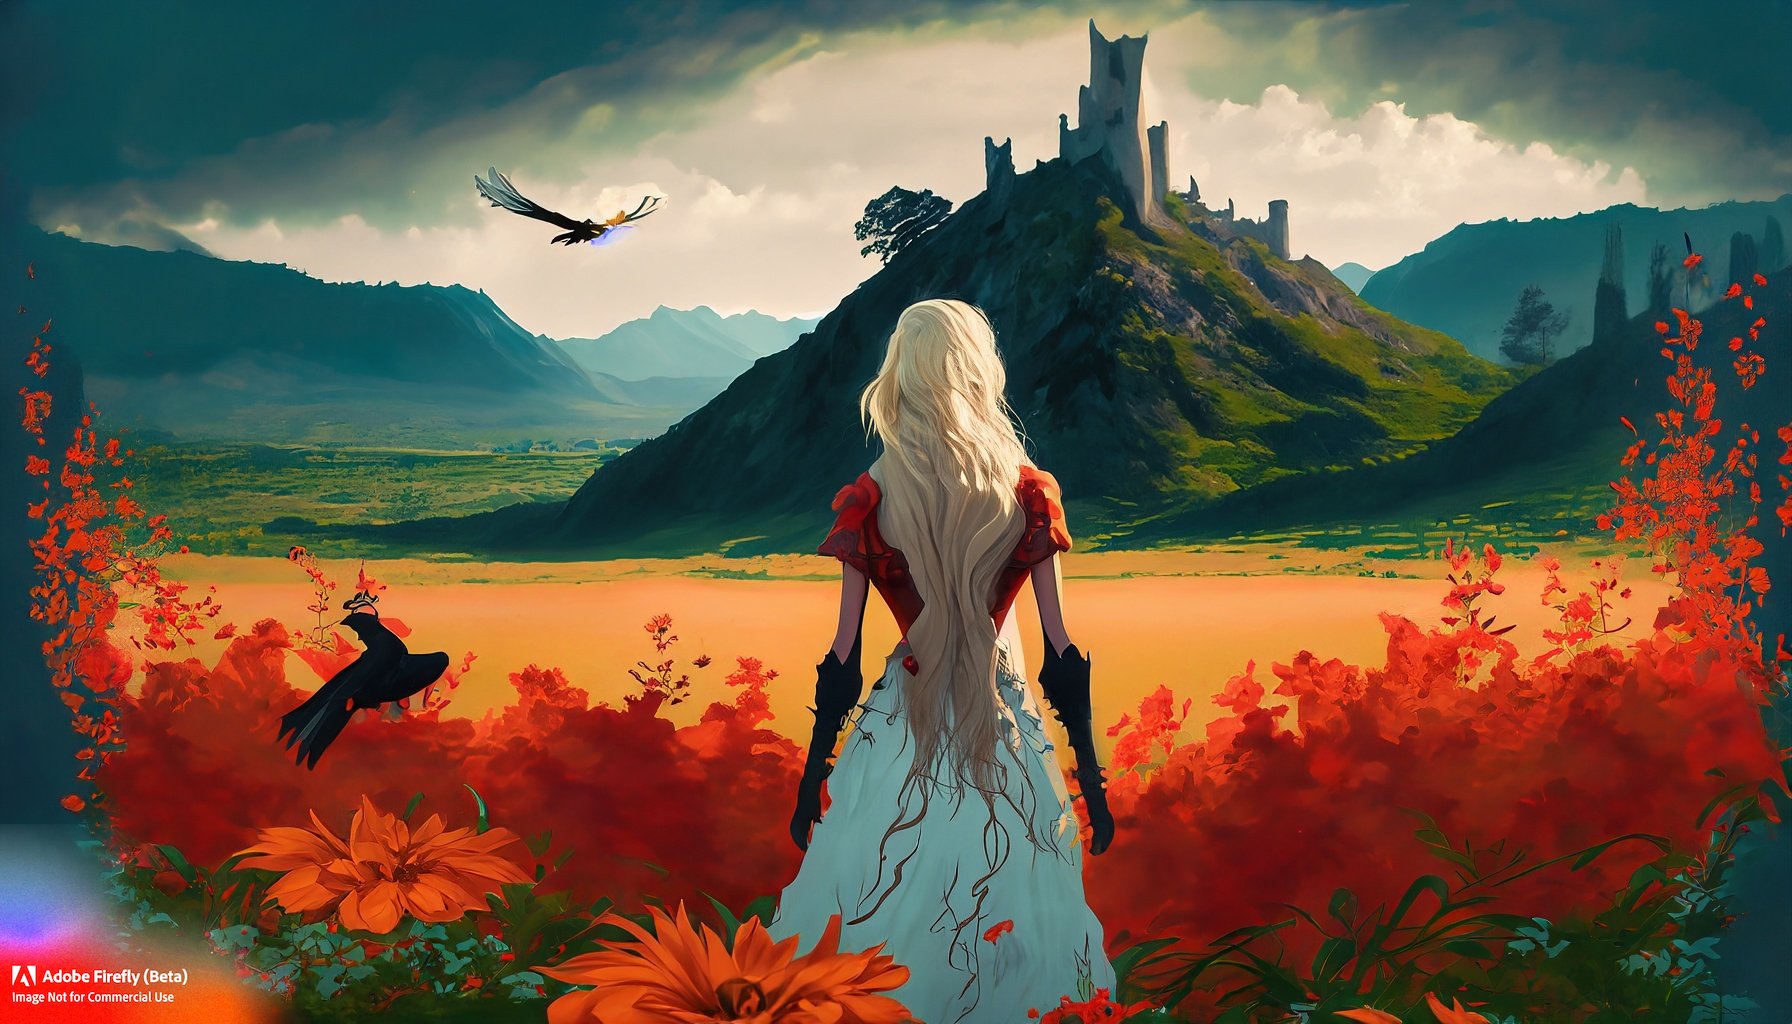 Firefly_a+blonde fae female facing away from the camera, standing in a meadow of red and orange flowers, with a mountain range of deep greens and a castle in the background, a hawk flying_art,wide_an (3).jpg